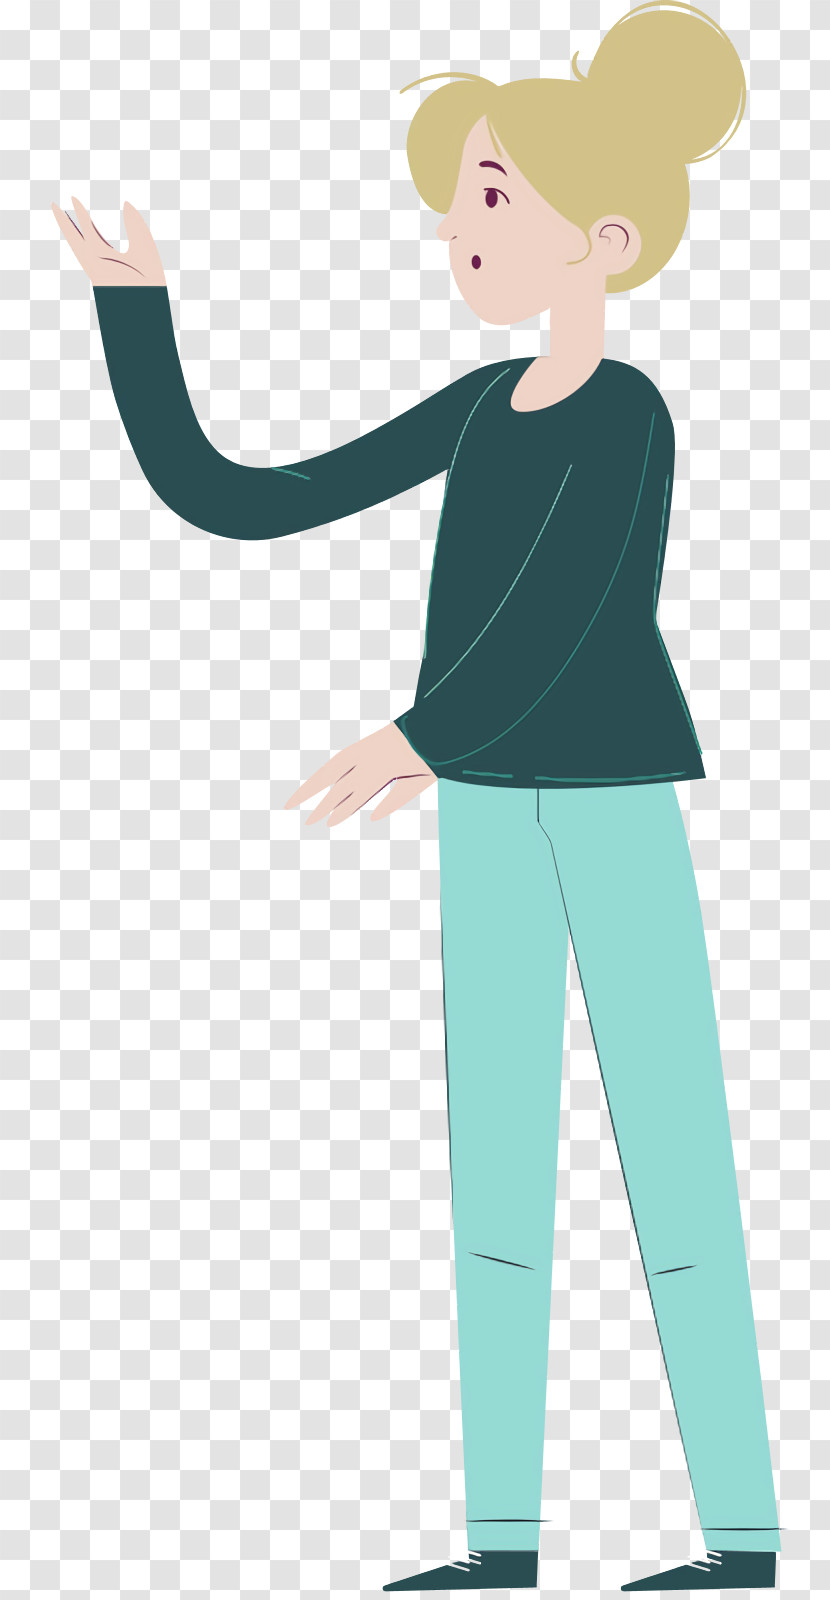 Clothing Cartoon Teal Male Happiness Transparent PNG